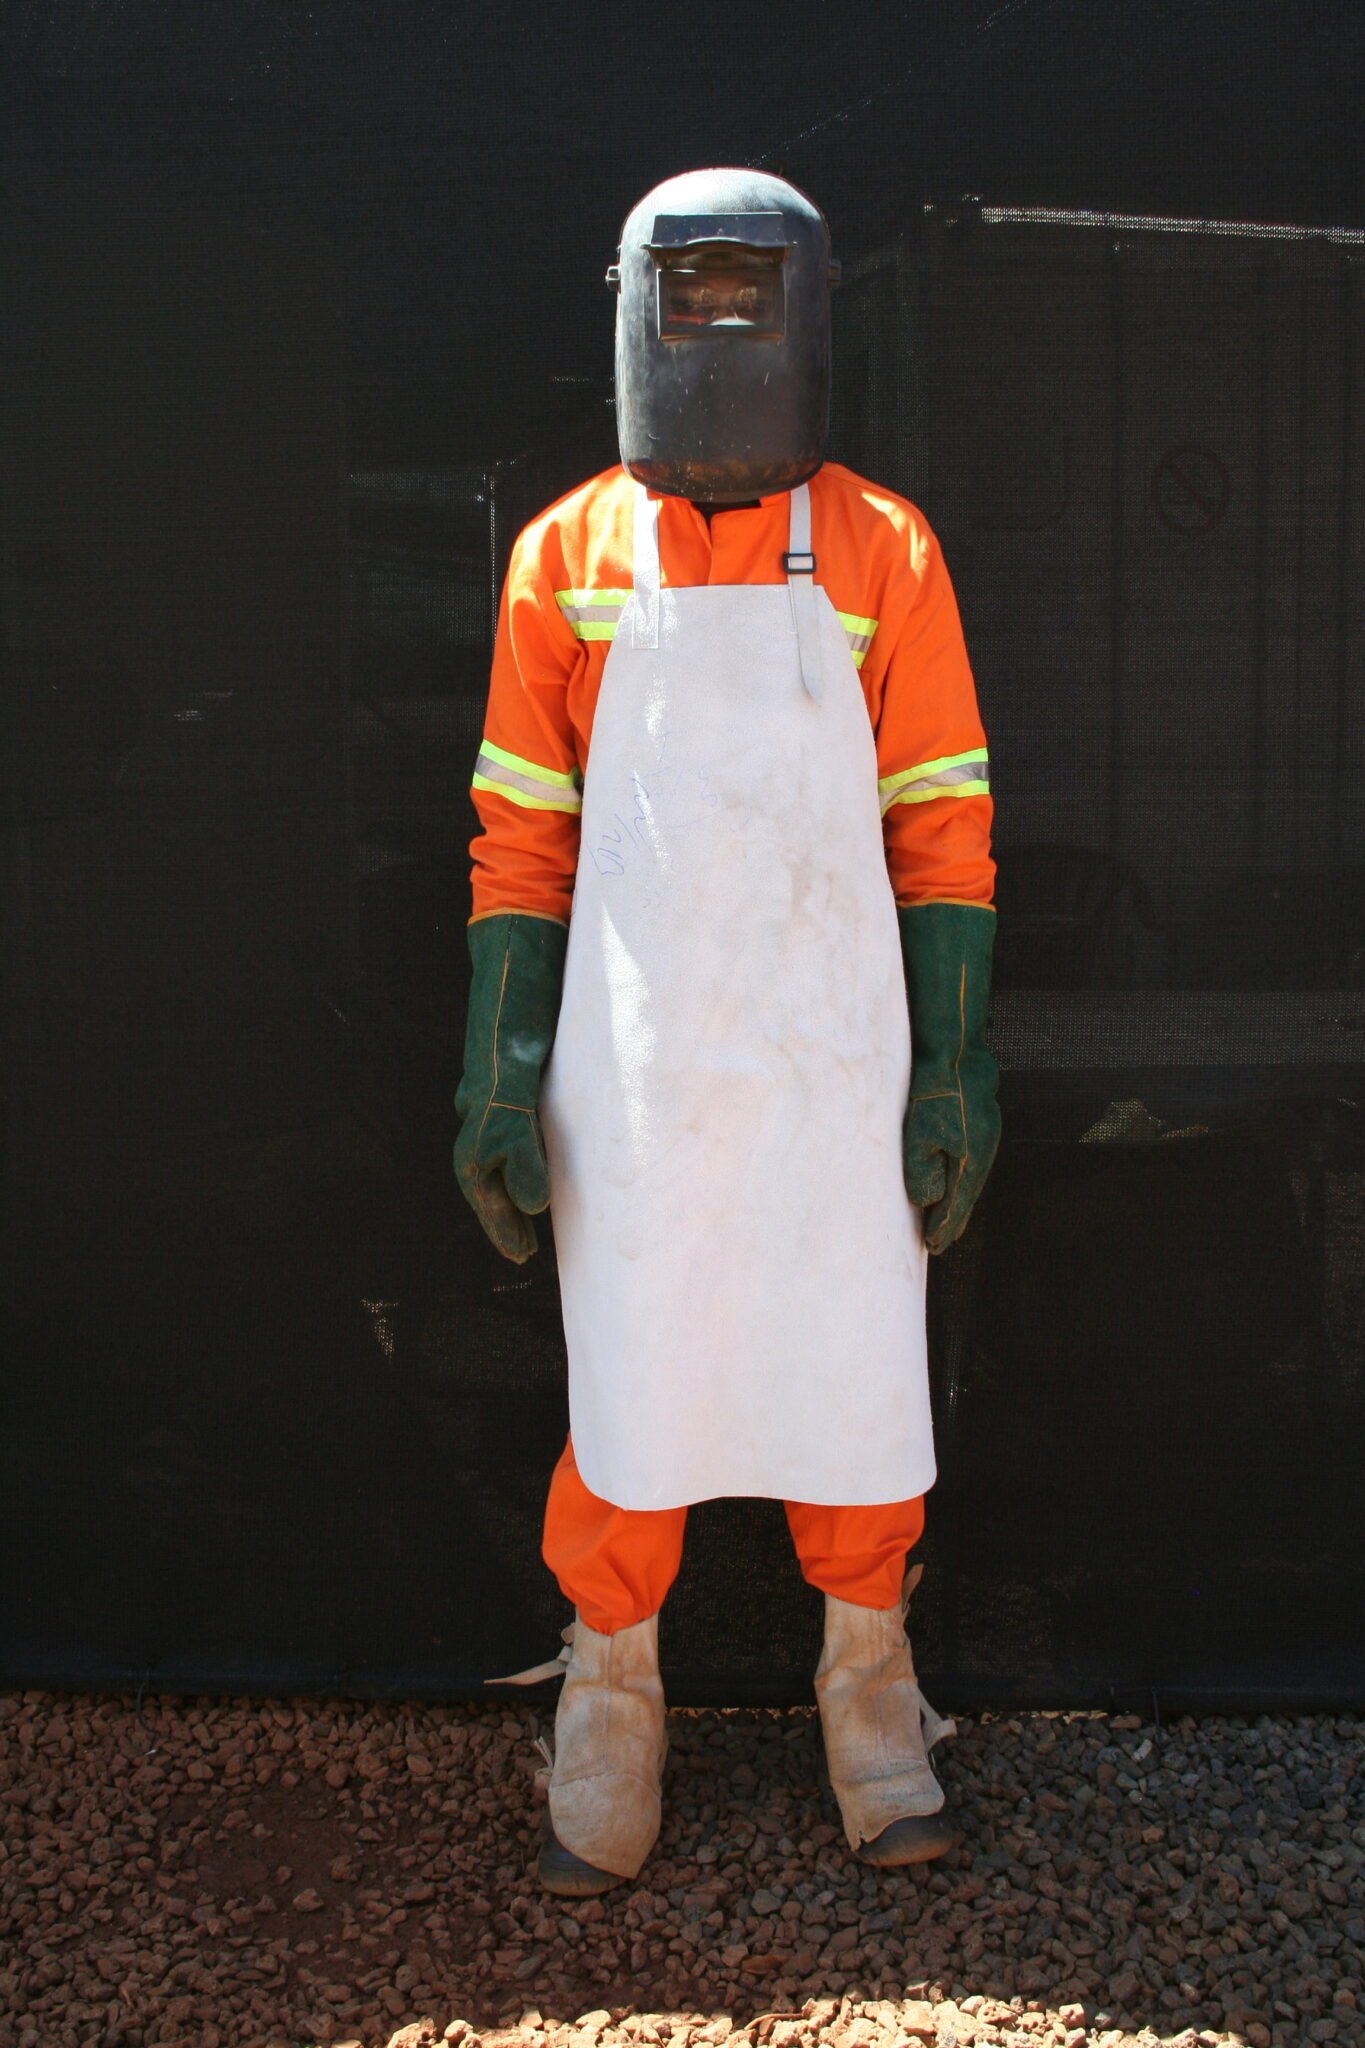 Hot Work Welding Safety Precautions Control Measures And Ppe